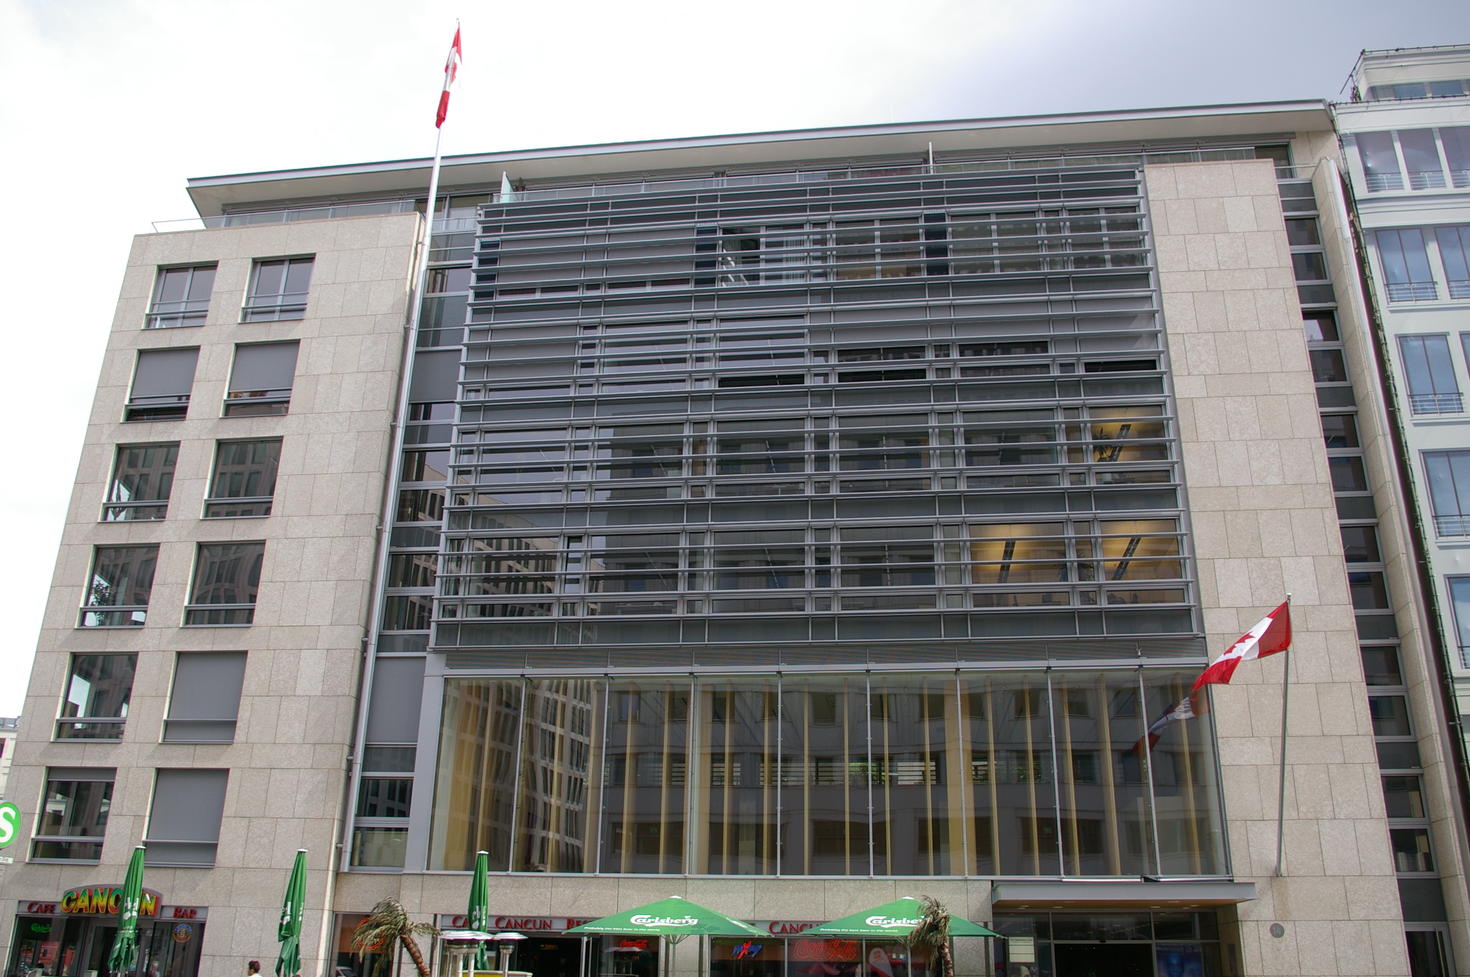 Canadian embassy in Germany